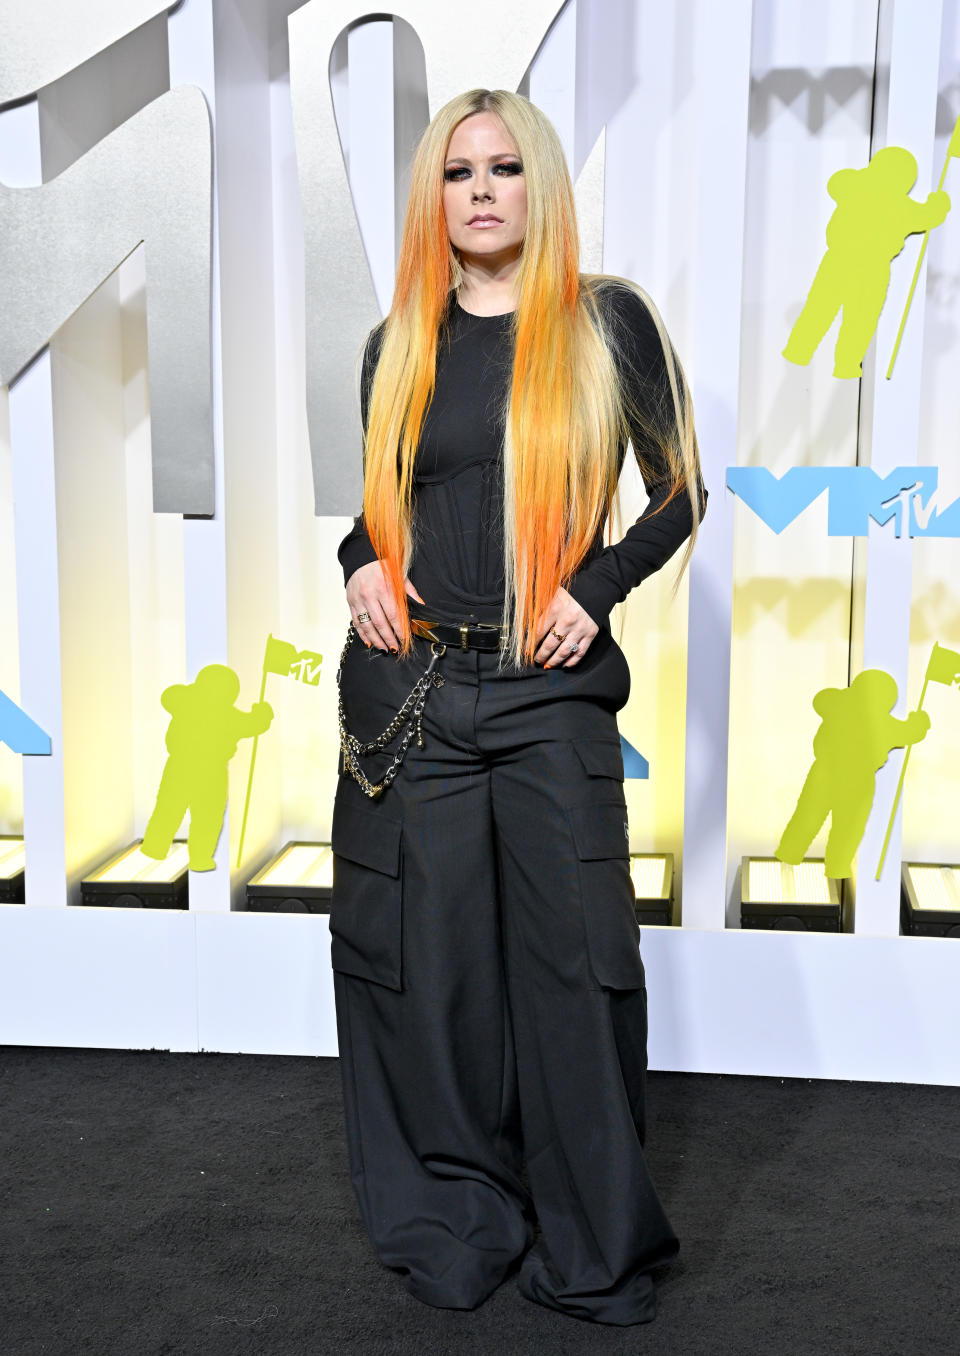 Avril Lavigne attends the 2022 MTV Video Music Awards at Prudential Center on August 28, 2022 in Newark, New Jersey. (Photo by Axelle/Bauer-Griffin/FilmMagic)